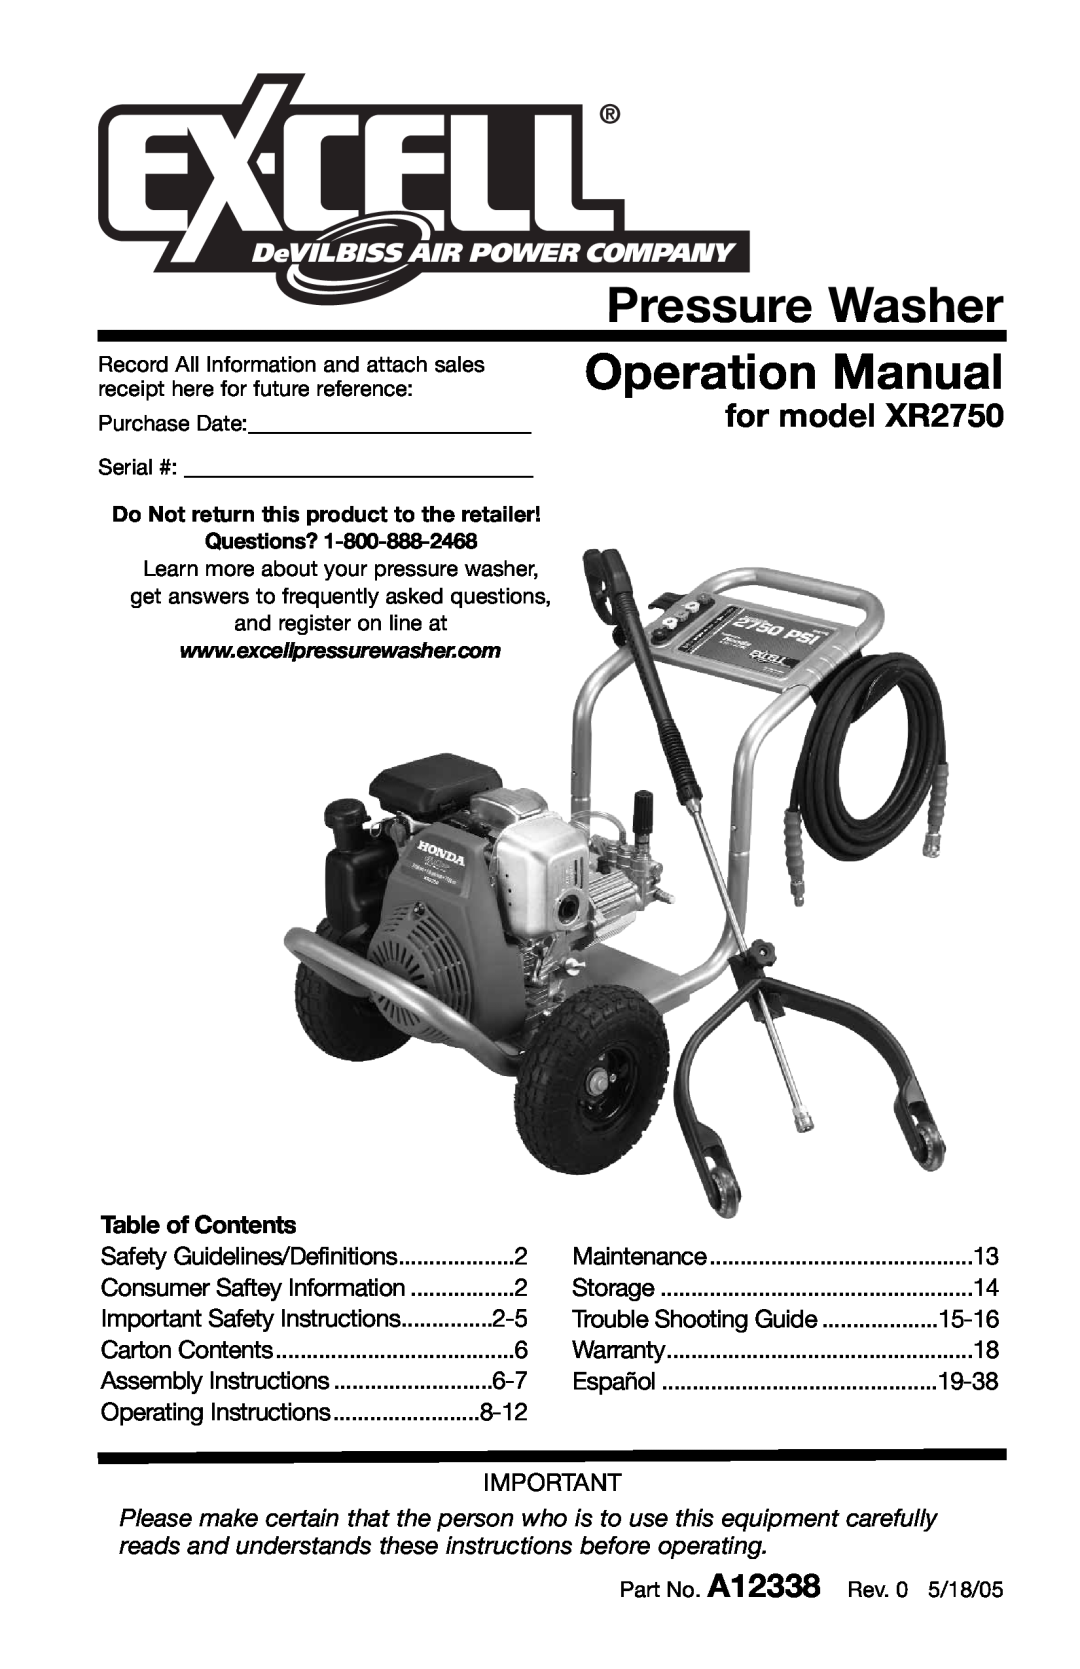 Excell Precision operation manual Pressure Washer, Operation Manual, for model XR2750 